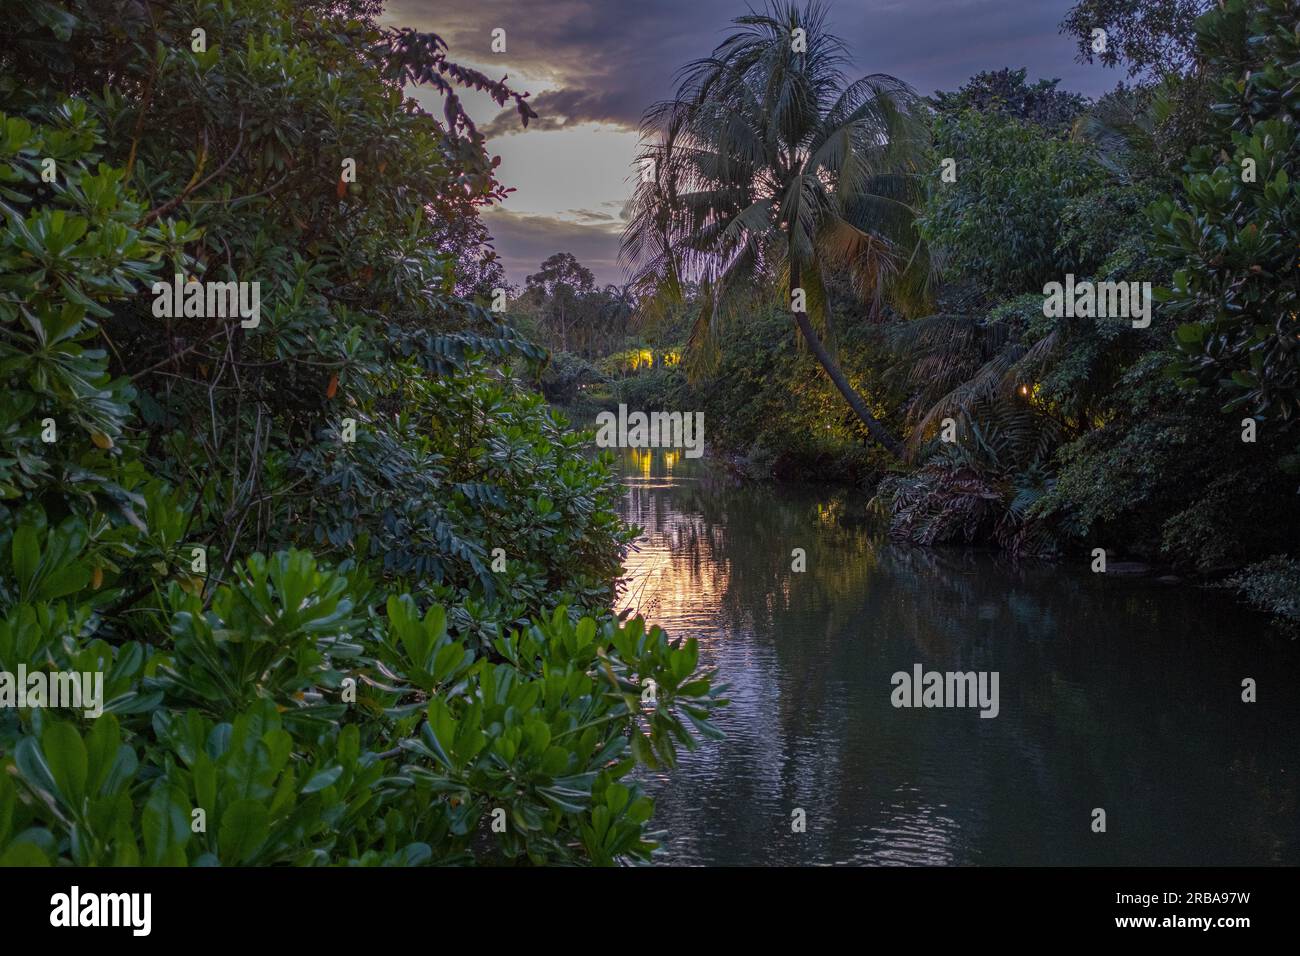 A water stream going through a lush tropical vegetation in the Gardens by the bay park in Singapore, taken at dusk, with some artificial light and no Stock Photo